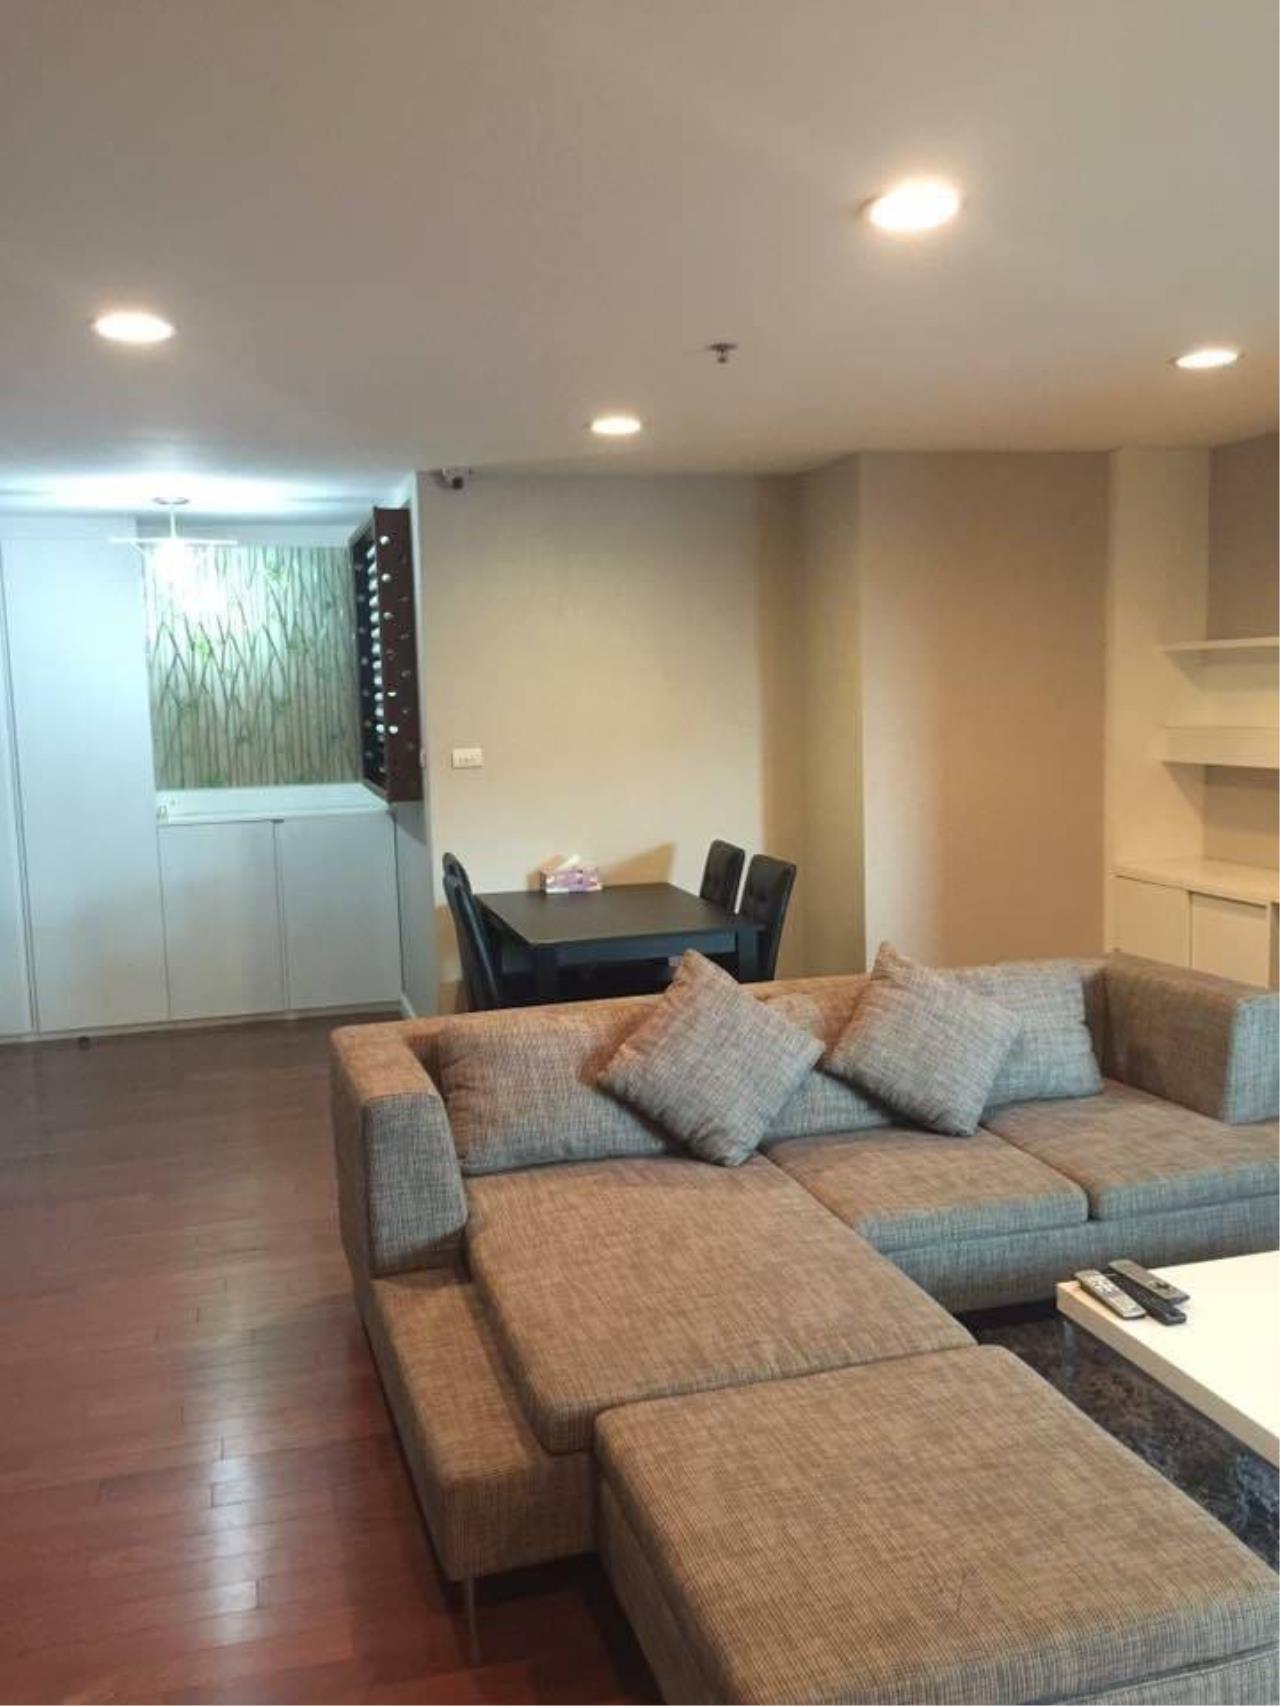 3 bedrooms 2 bathrooms size 106 sqm. belle rama 9 for rent